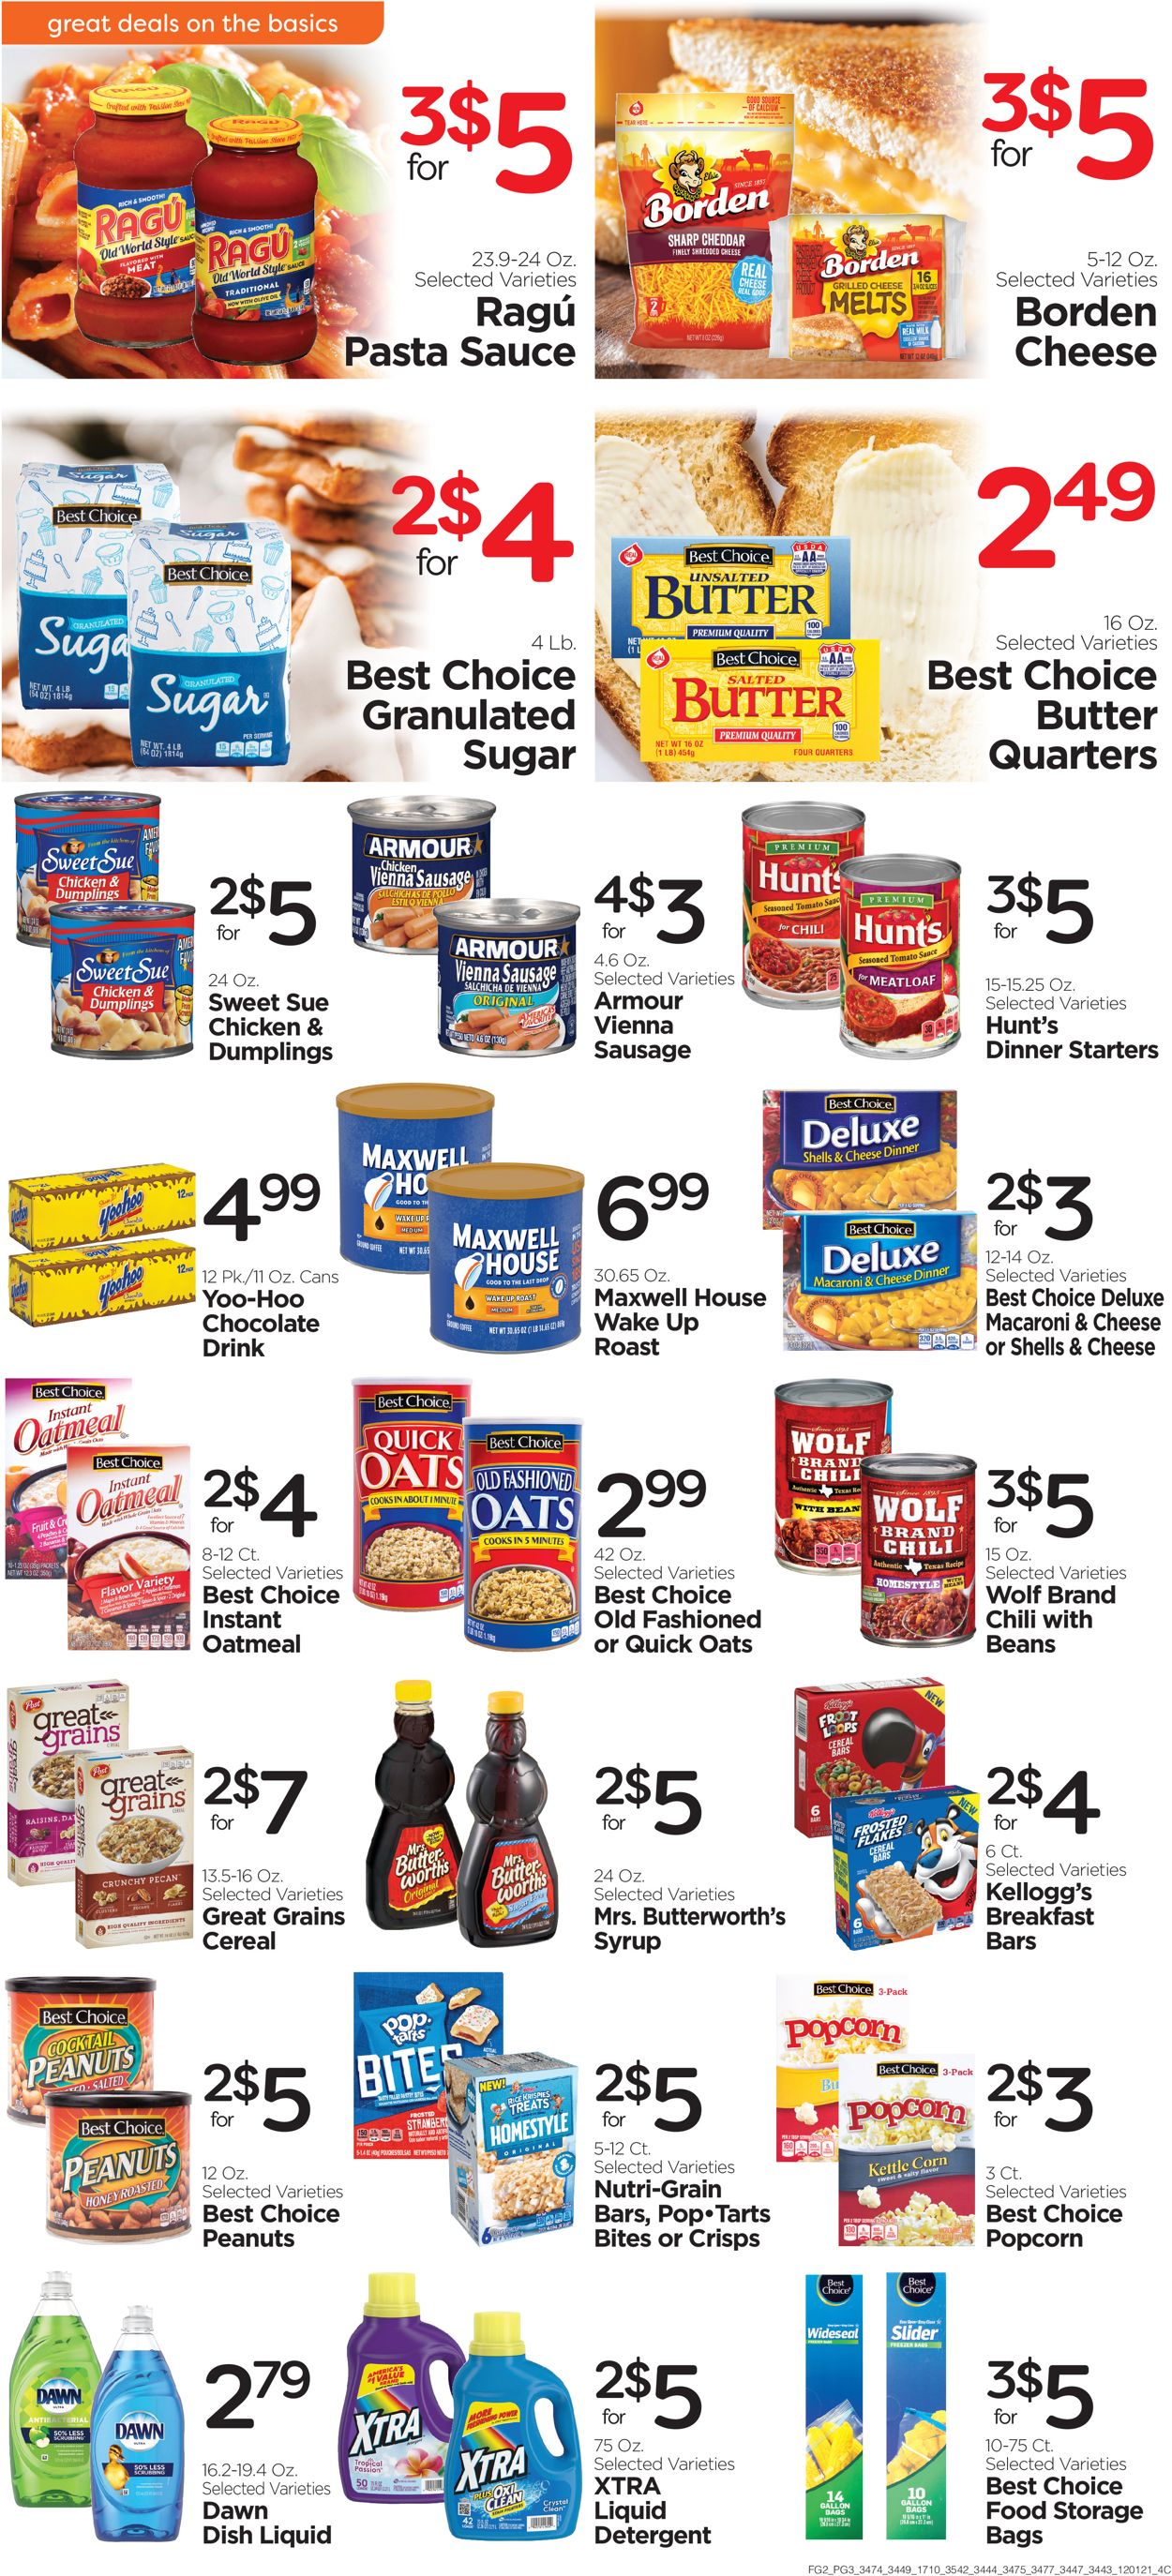 Edwards Food Giant Ad from 12/01/2021